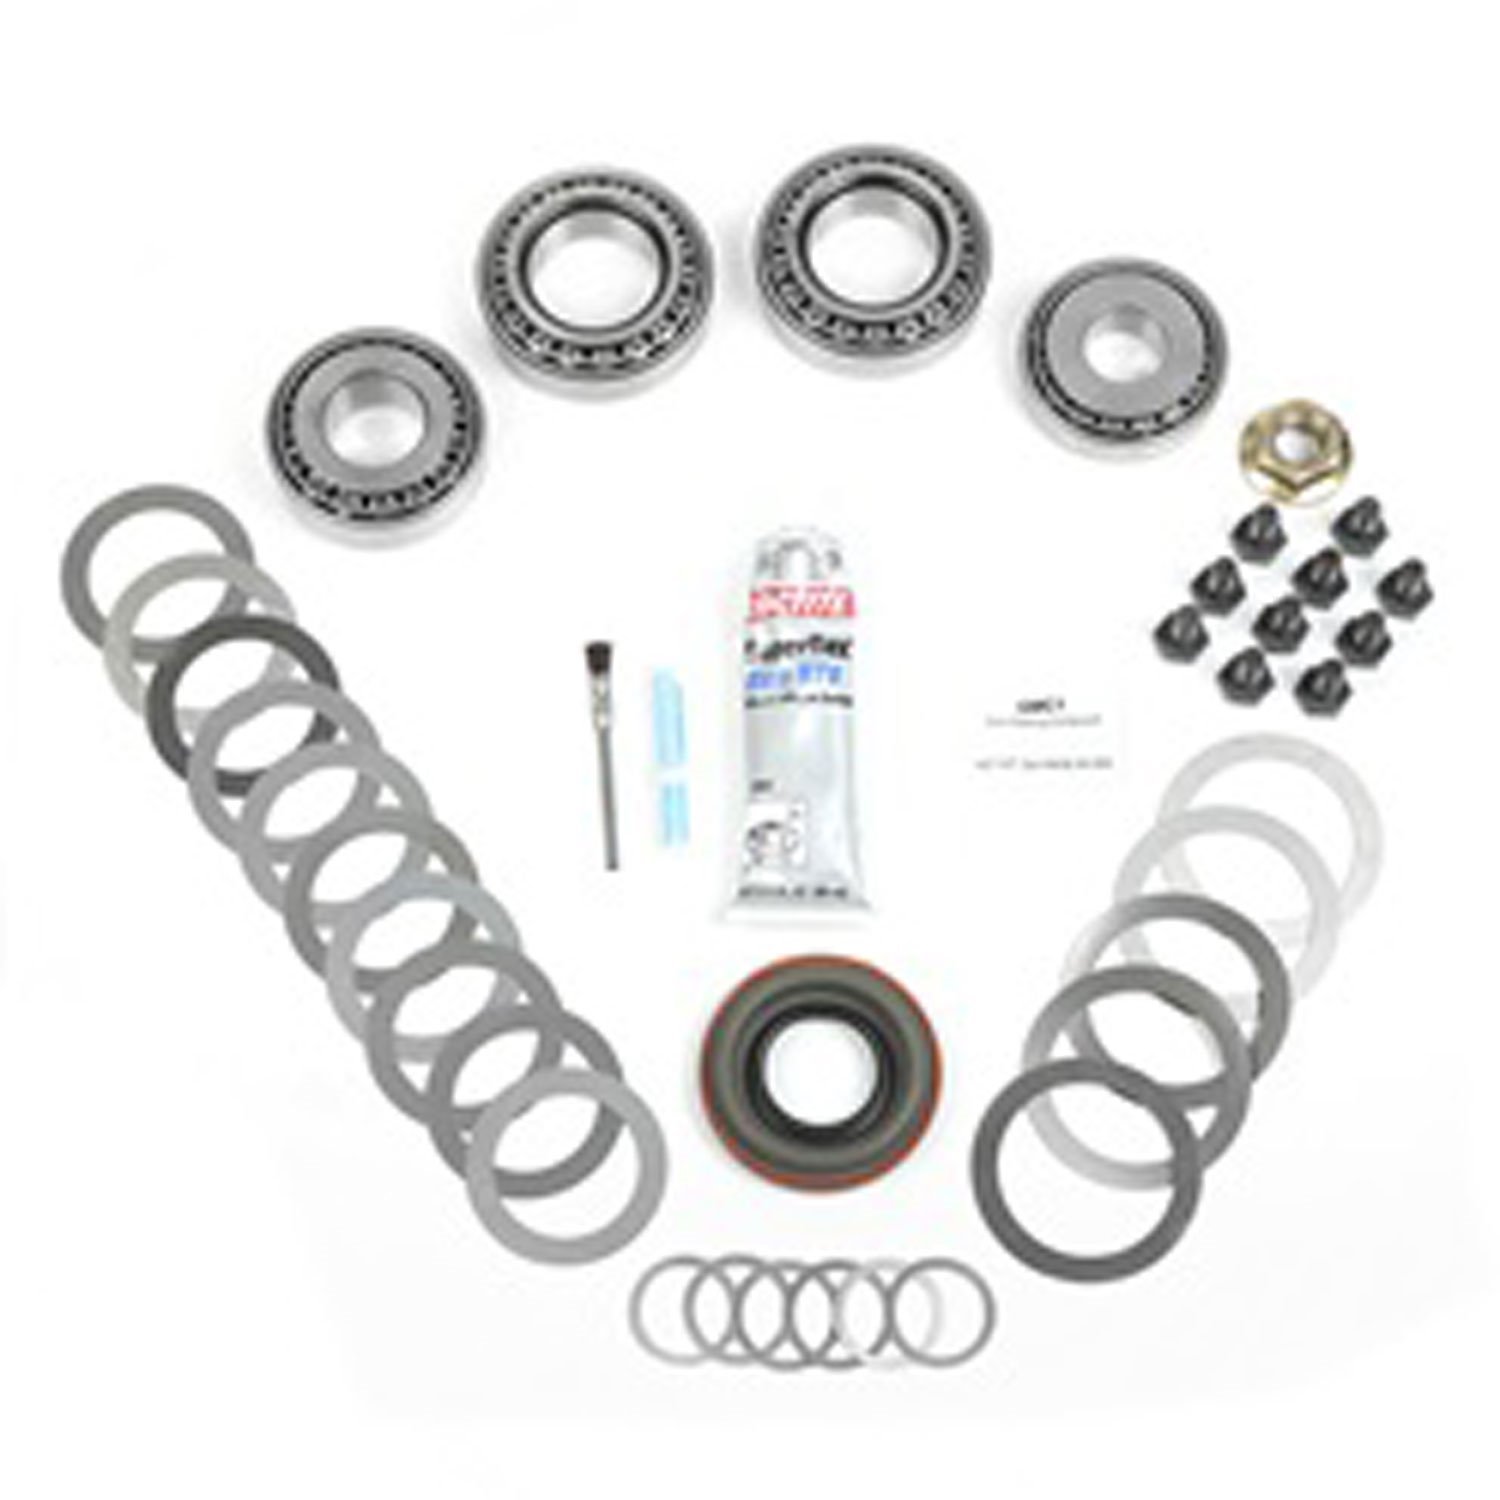 This differential rebuild kit from Omix-ADA for Rear